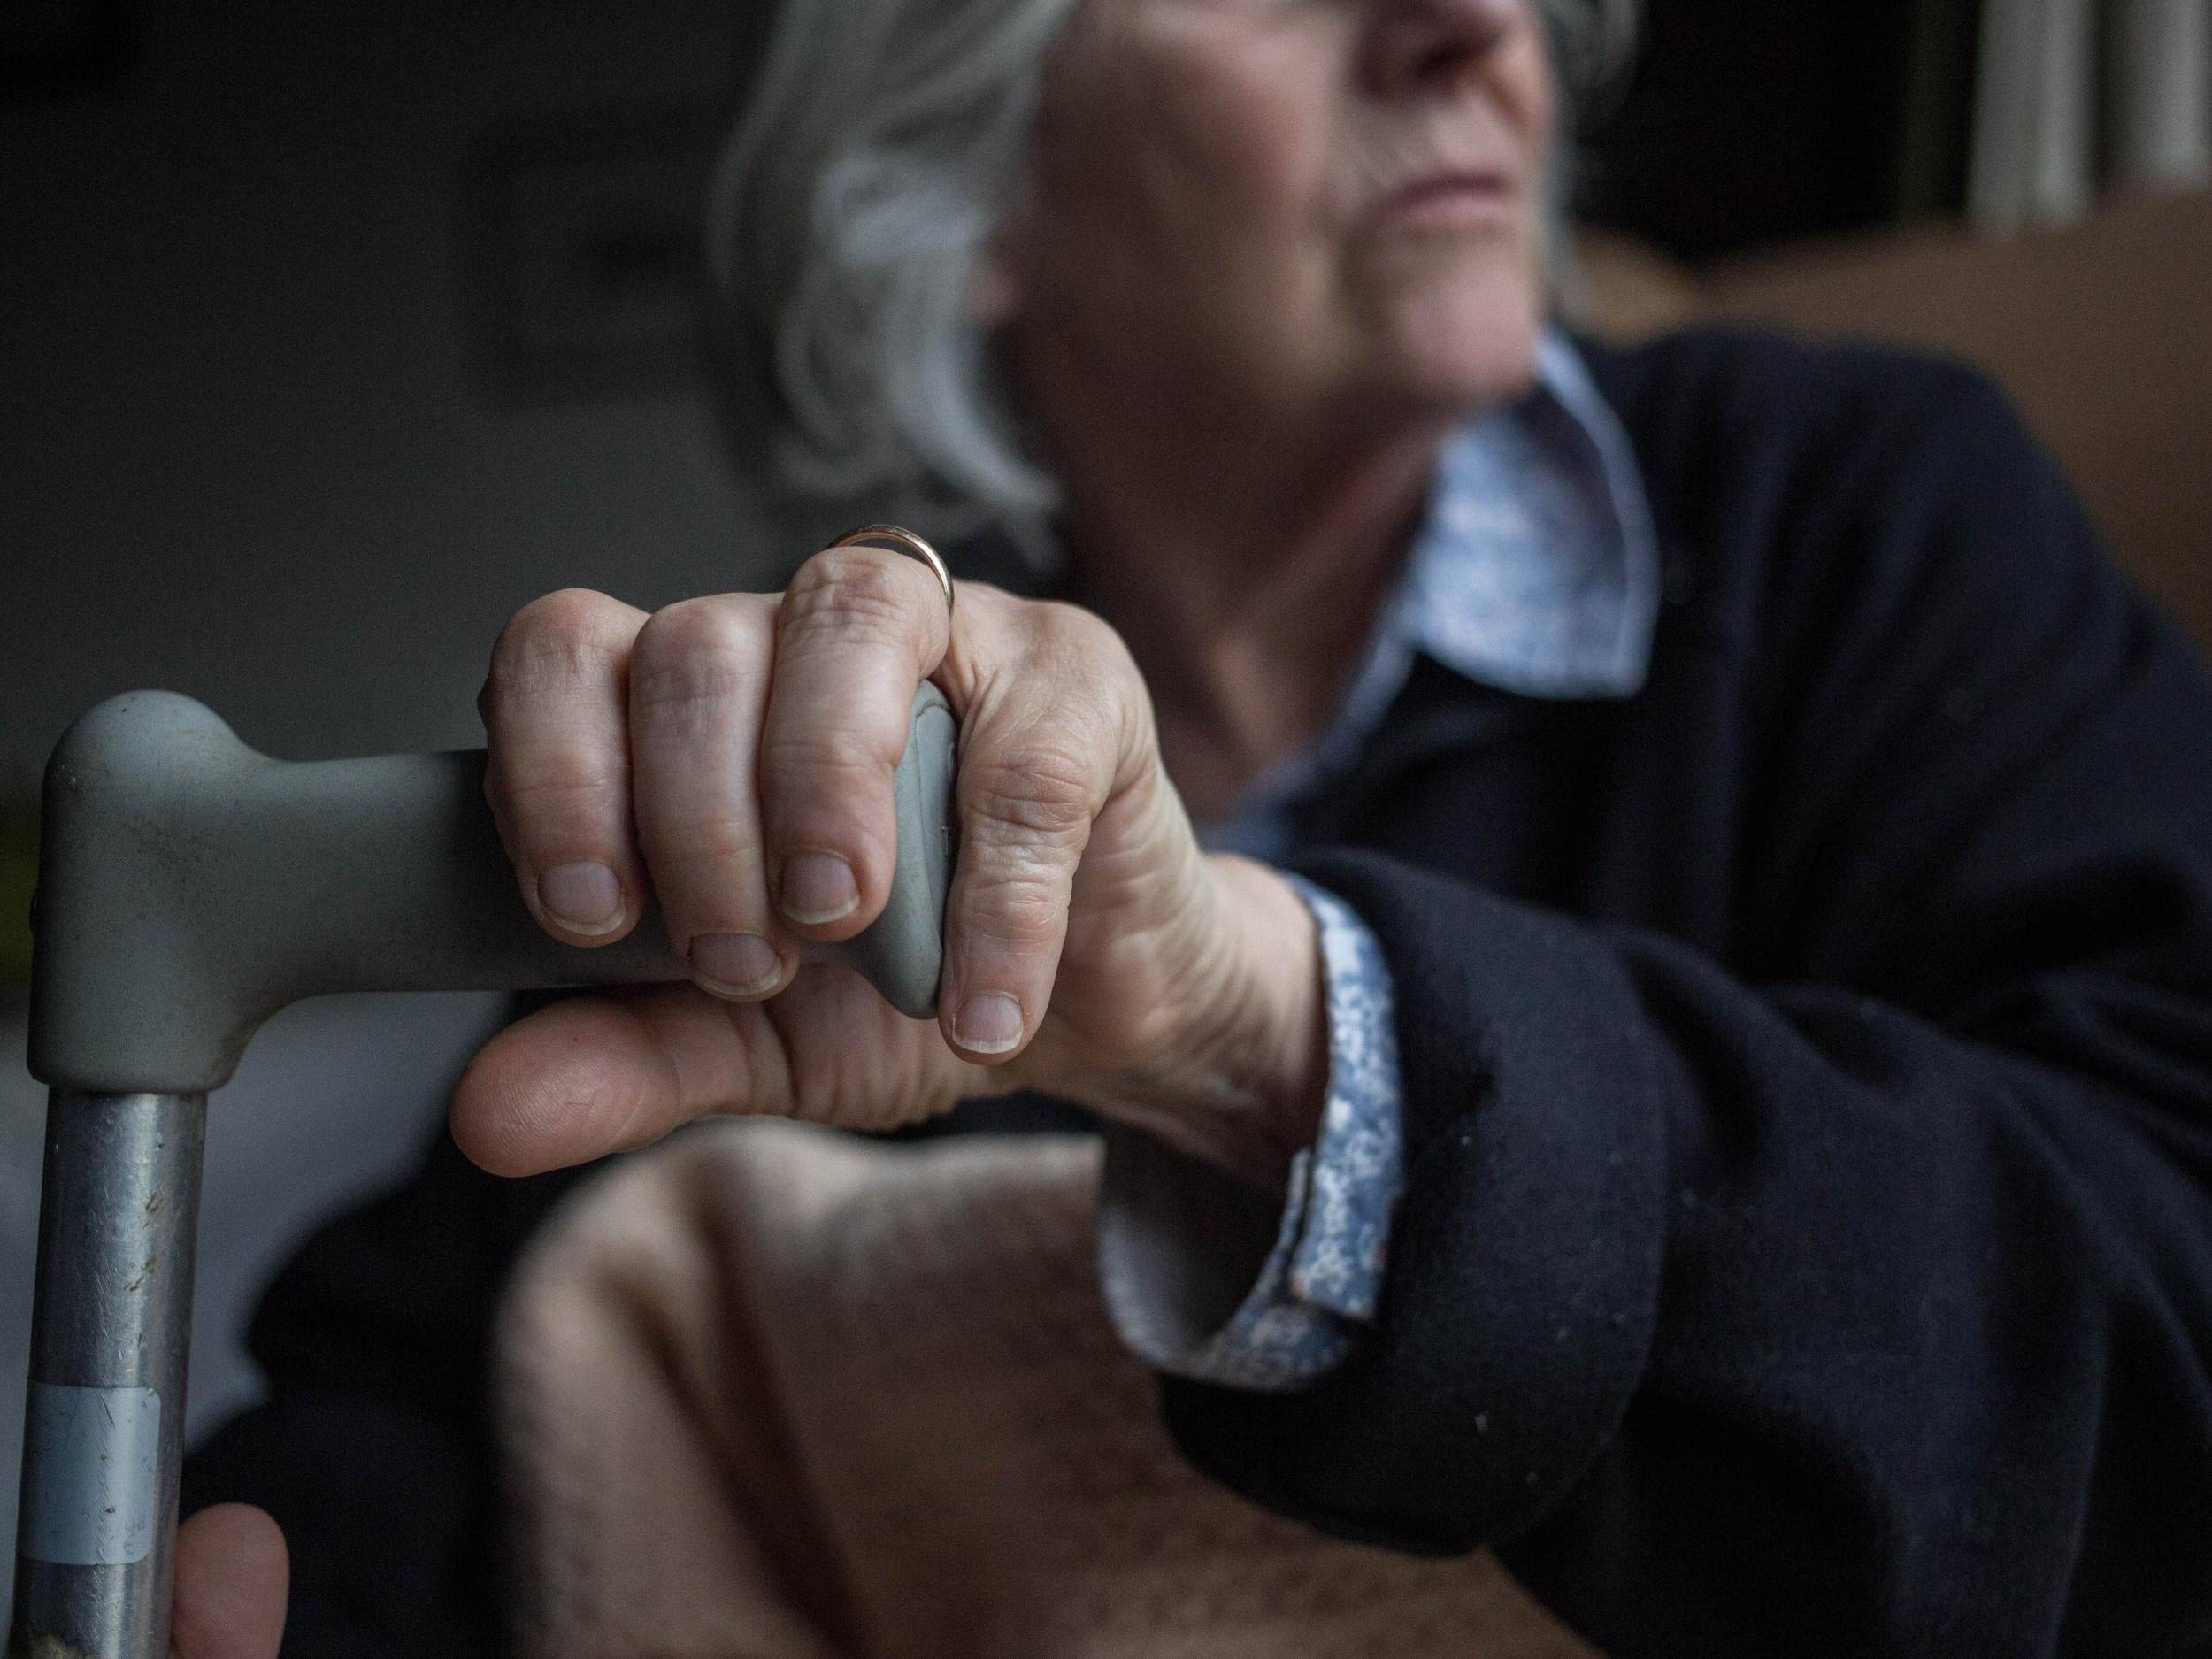 It's society's responsibility to care for the elderly